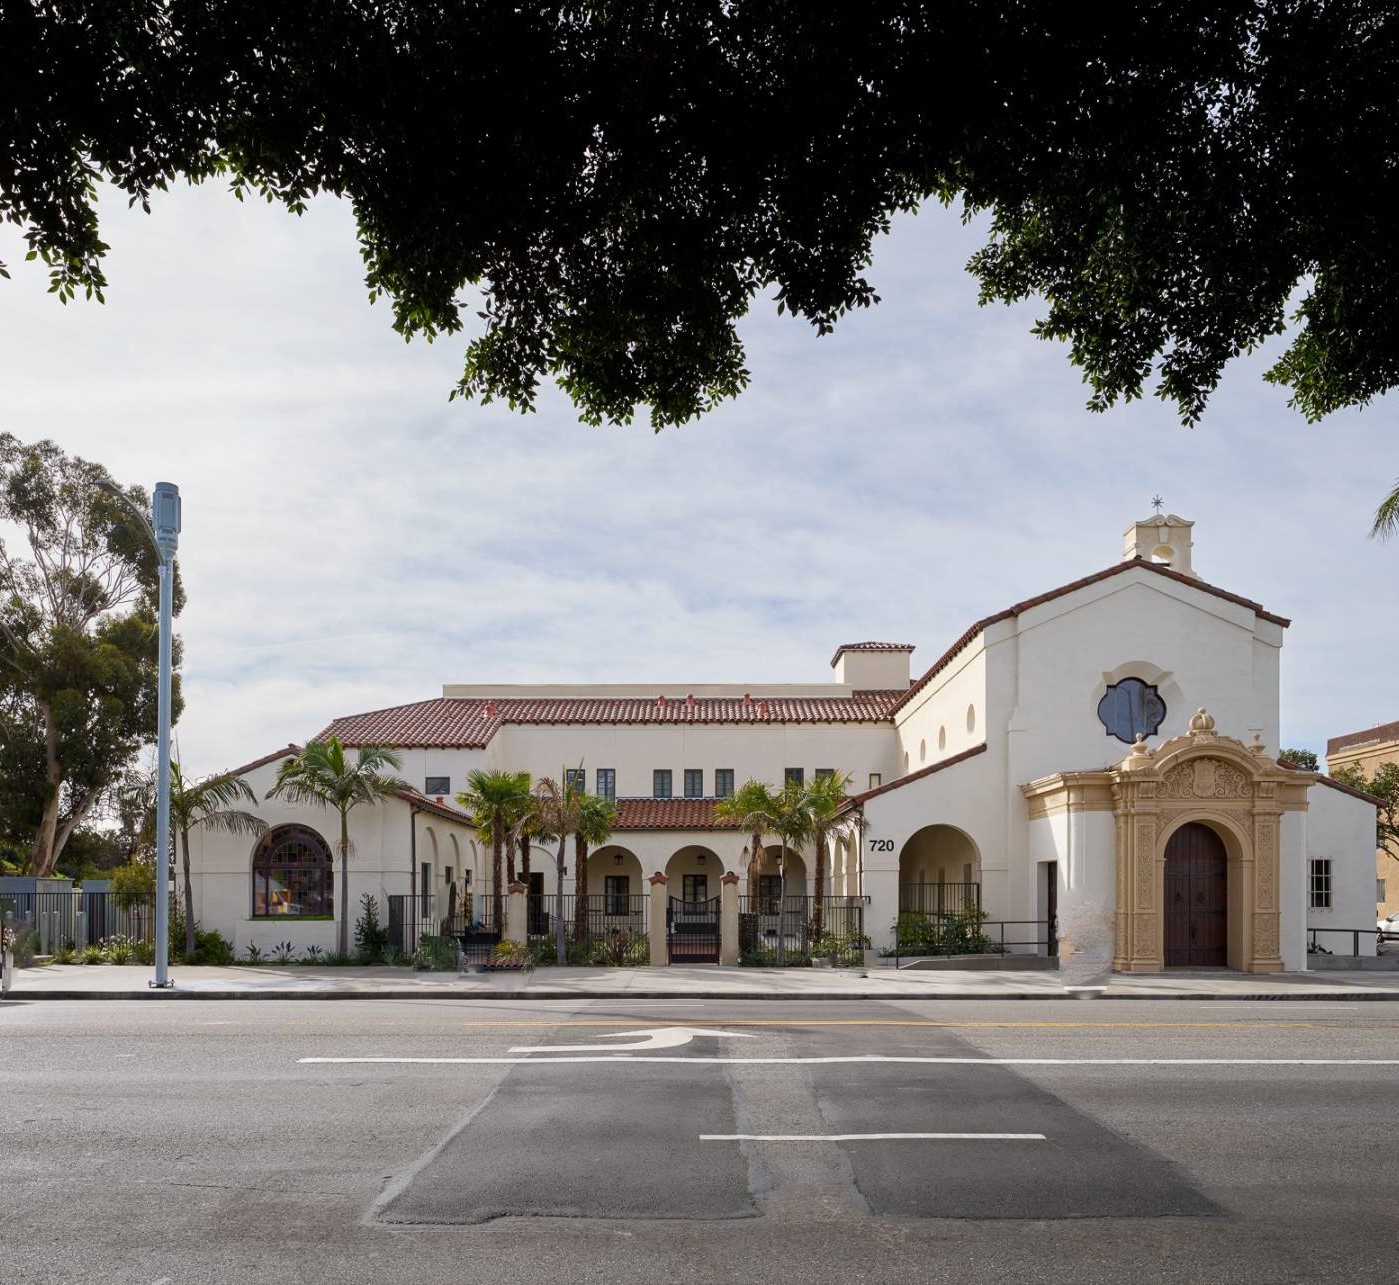 Exterior view of Washington View Apartments. It is a large white building with red-brown tile roof. Palm trees in a fenced courtyard are visible.